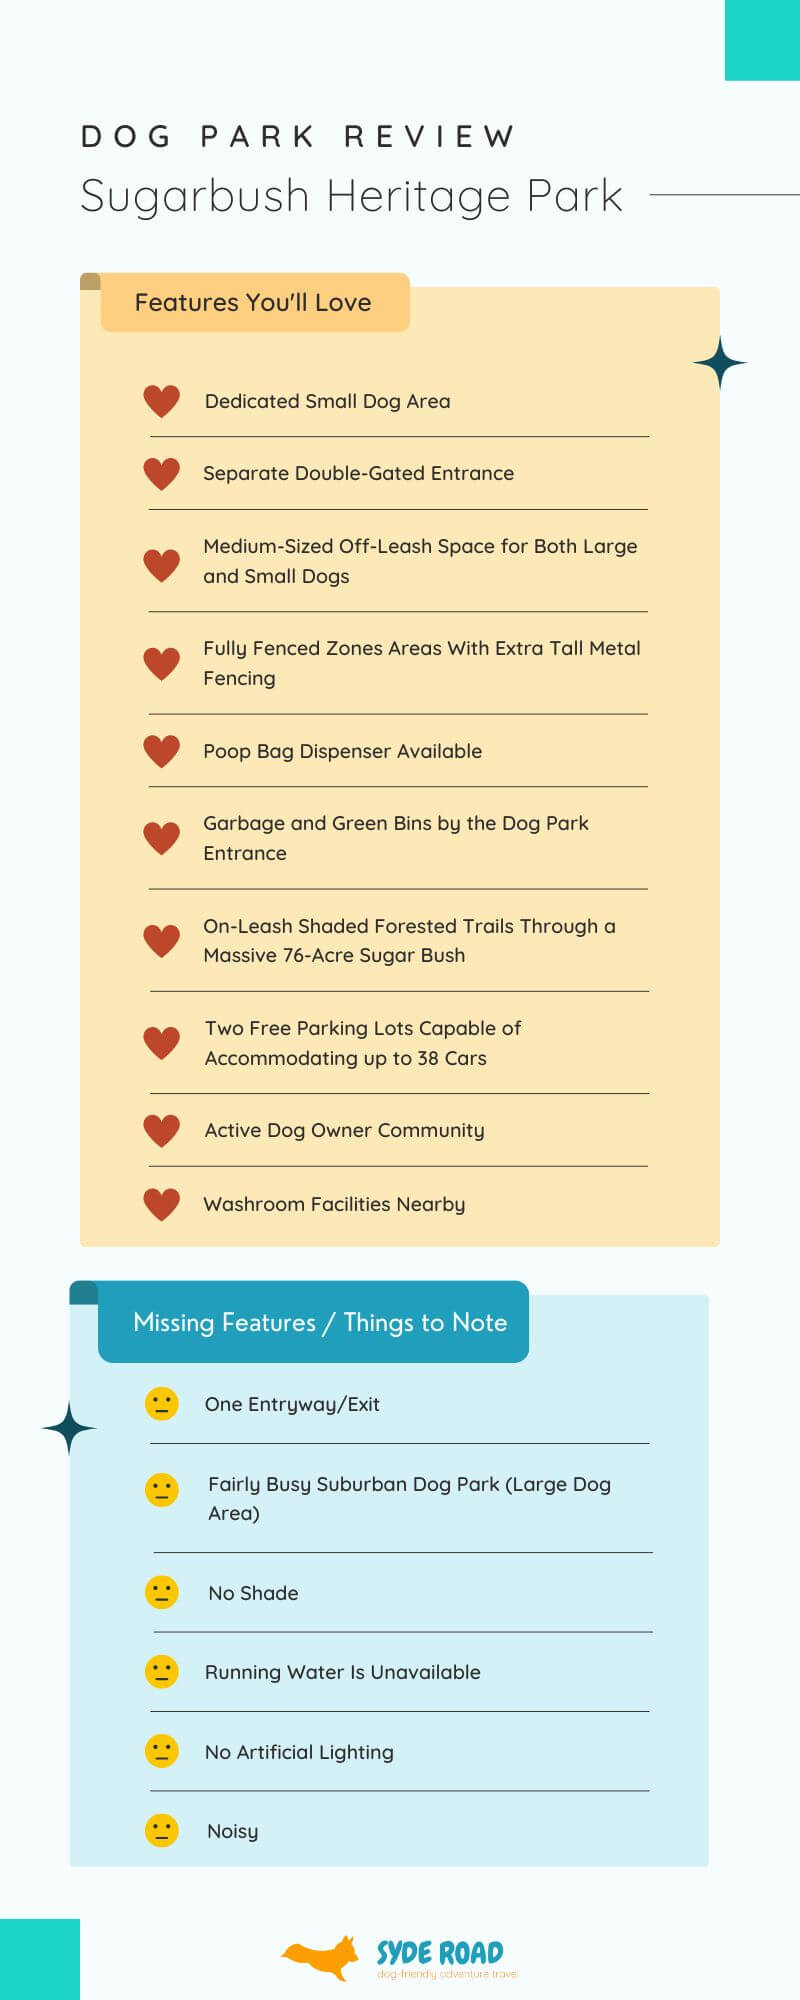 Sugarbush Heritage Park - Dog Park Review - Features You'll Love and Missing Features / Things You Should Know summary infographic